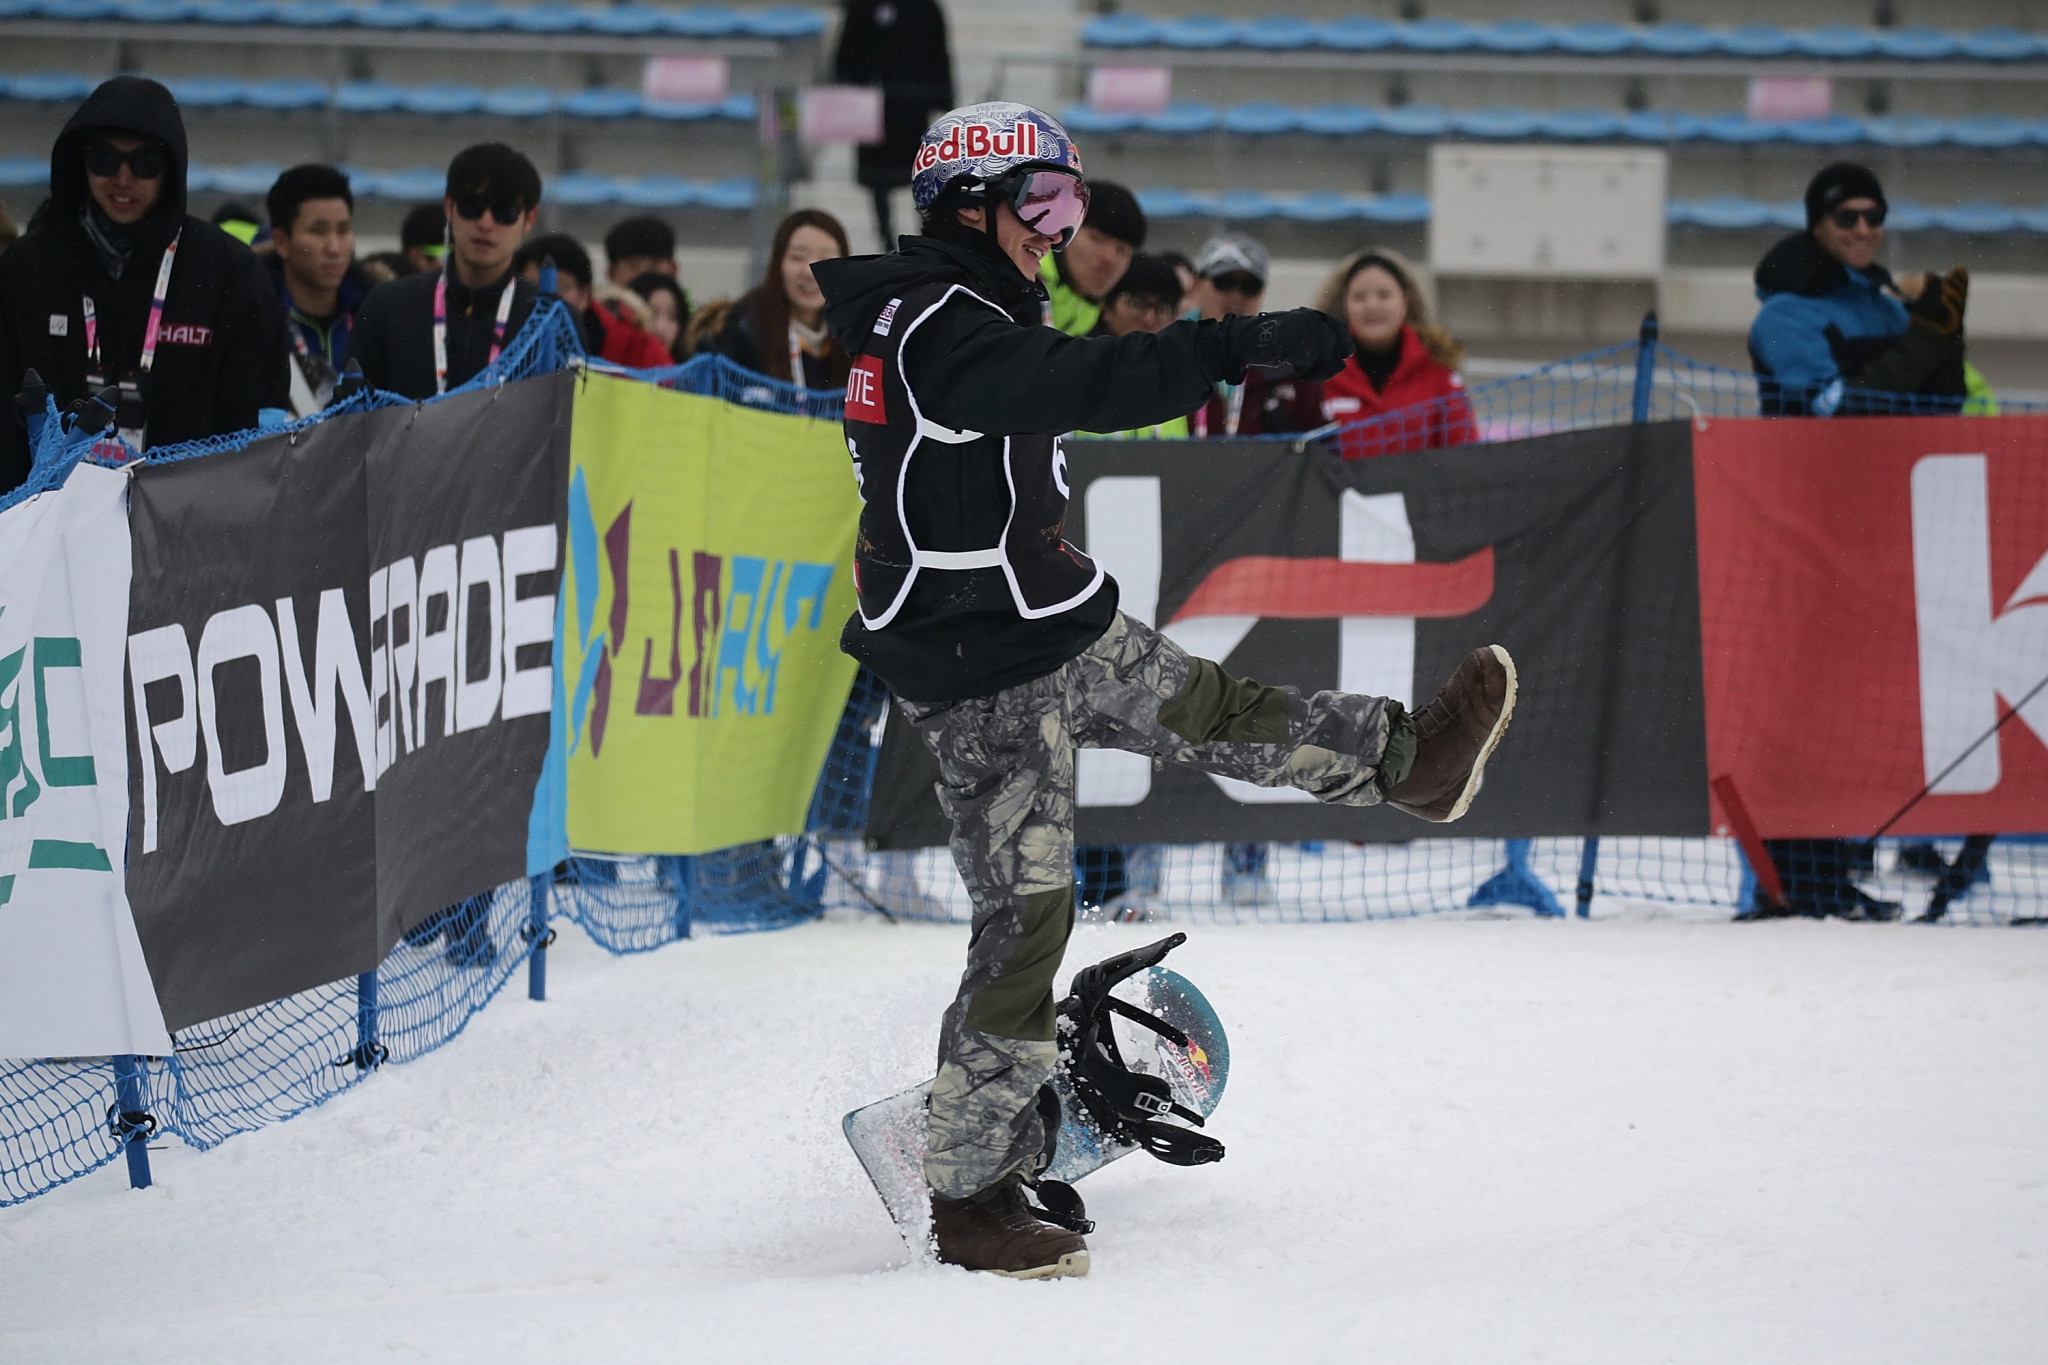 McMorris and Collins top qualification standings at FIS Snowboard Big Air World Cup in Beijing